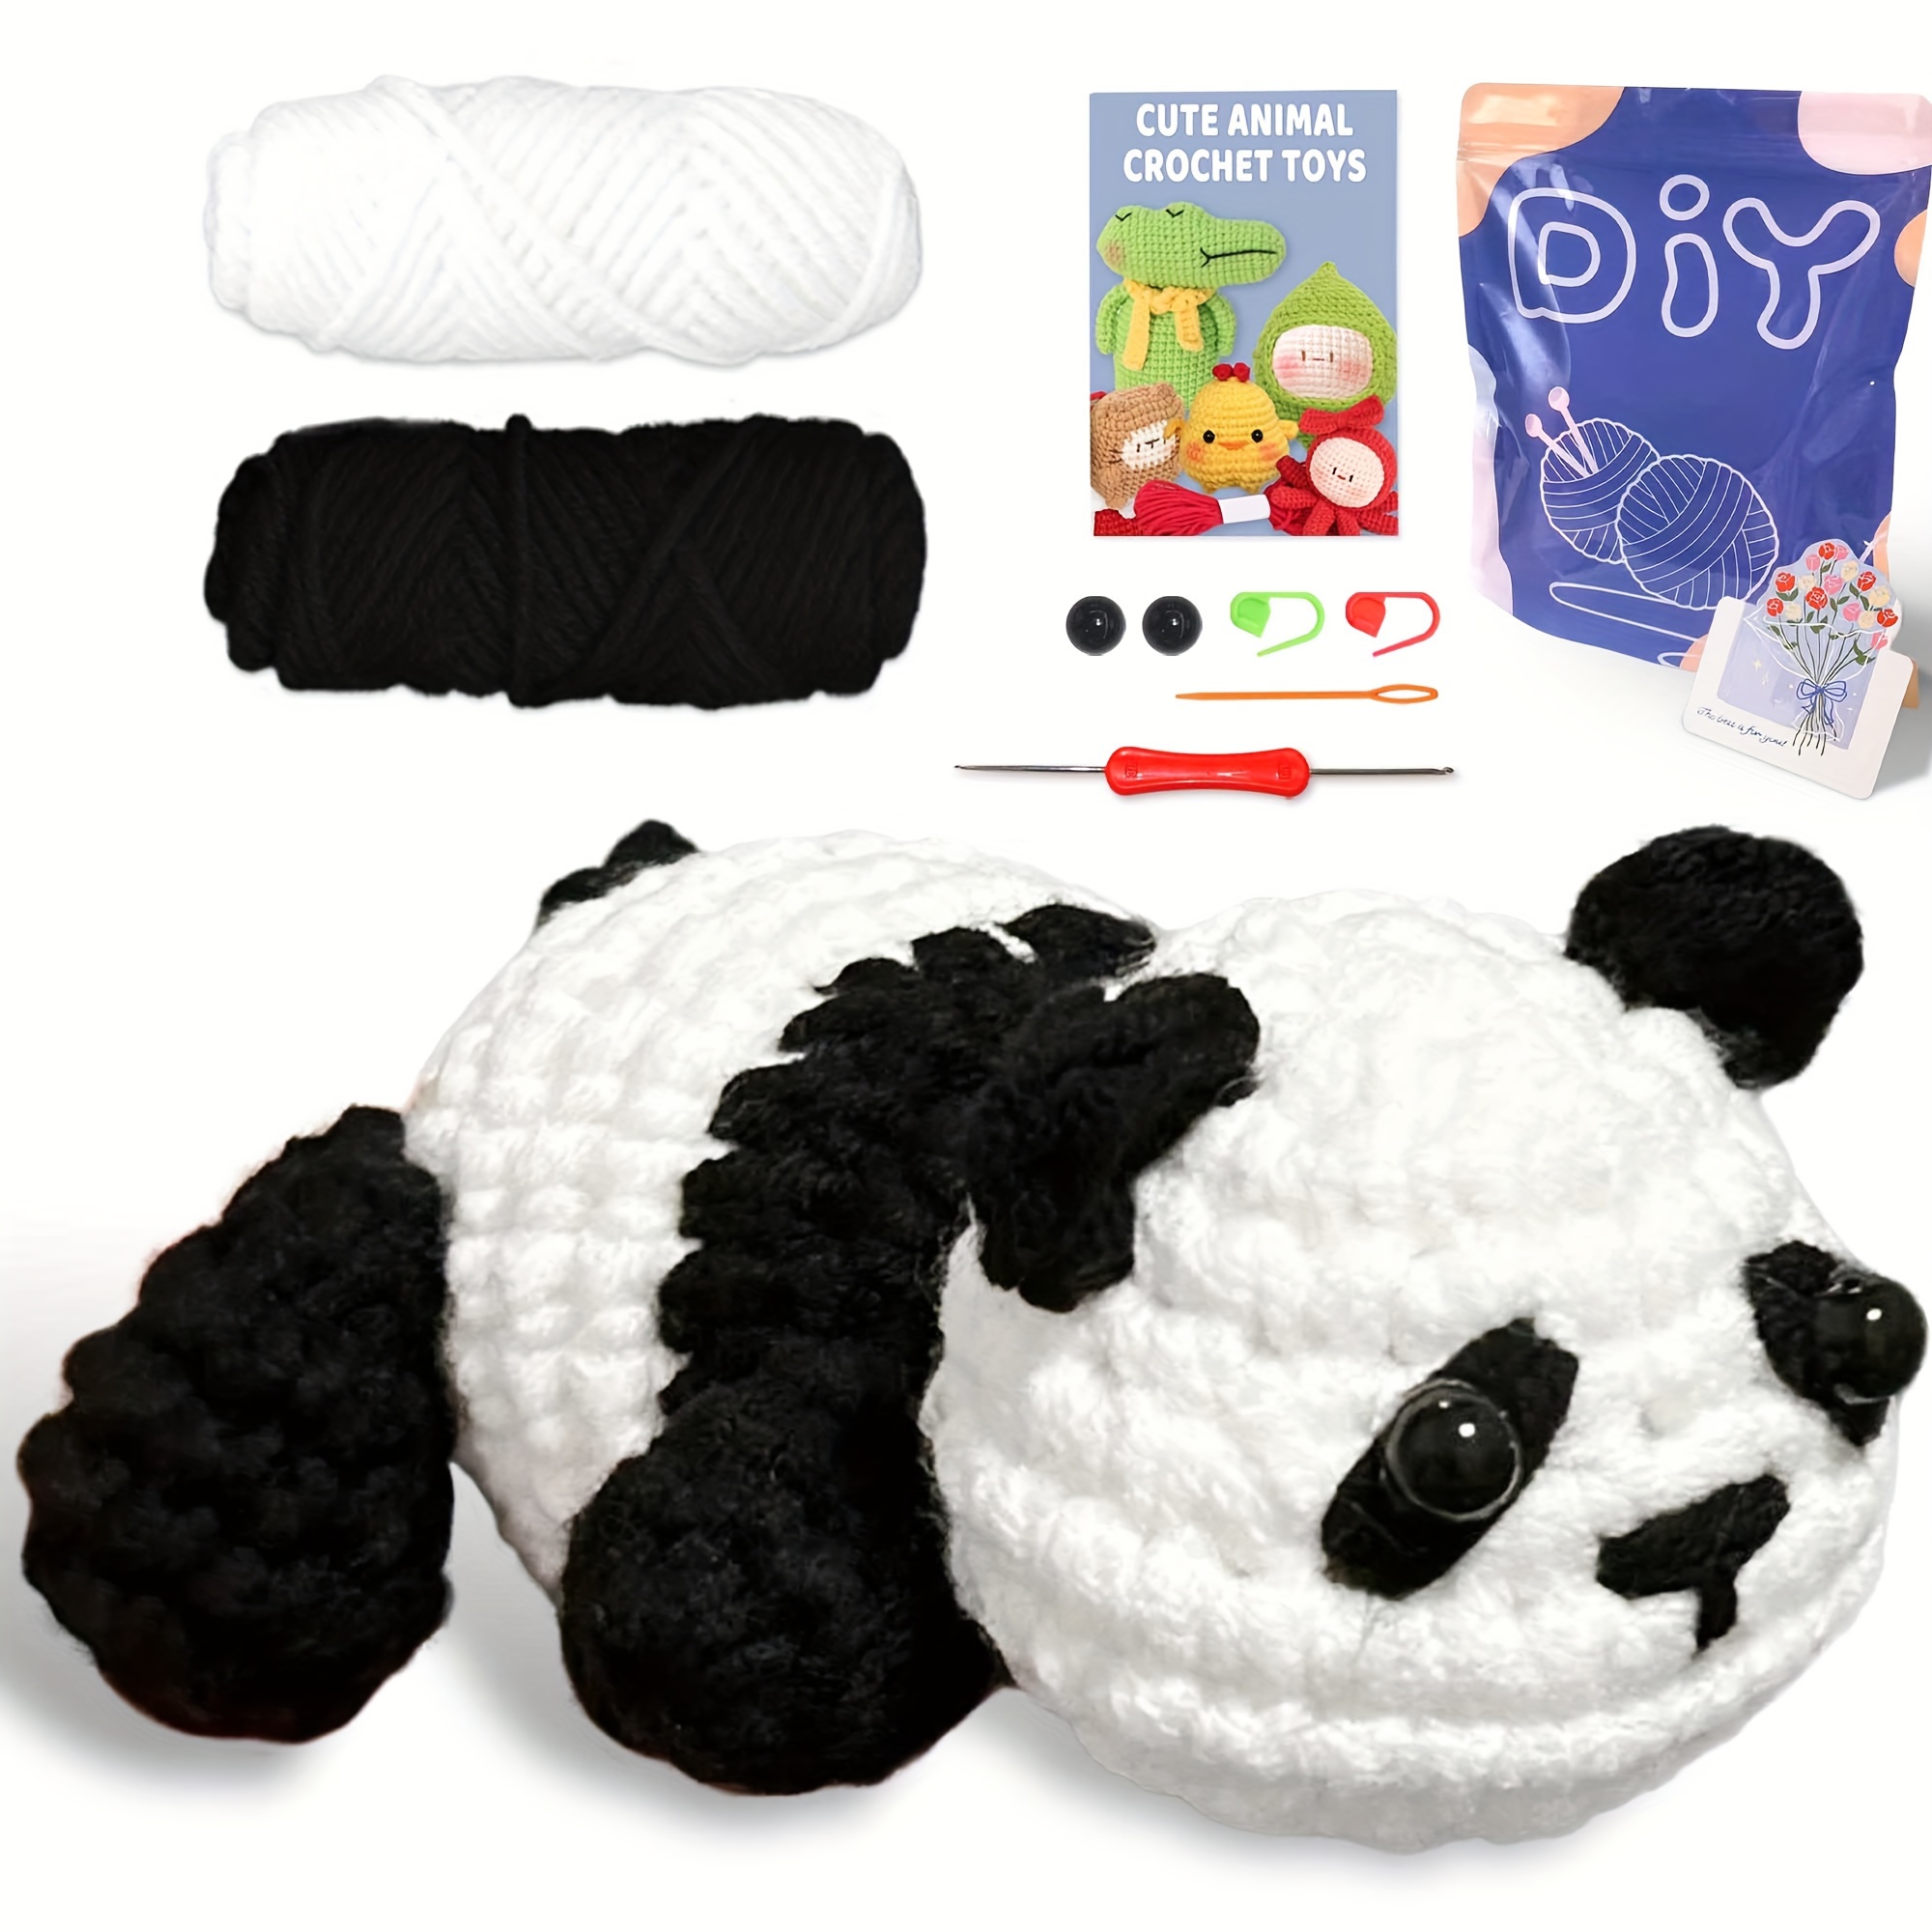 

Panda Crochet Kit For Beginners - Complete Starter Set With Video Tutorials, Yarn, Seam Markers & Instructions - Cute Black & White Panda Crafting Gift